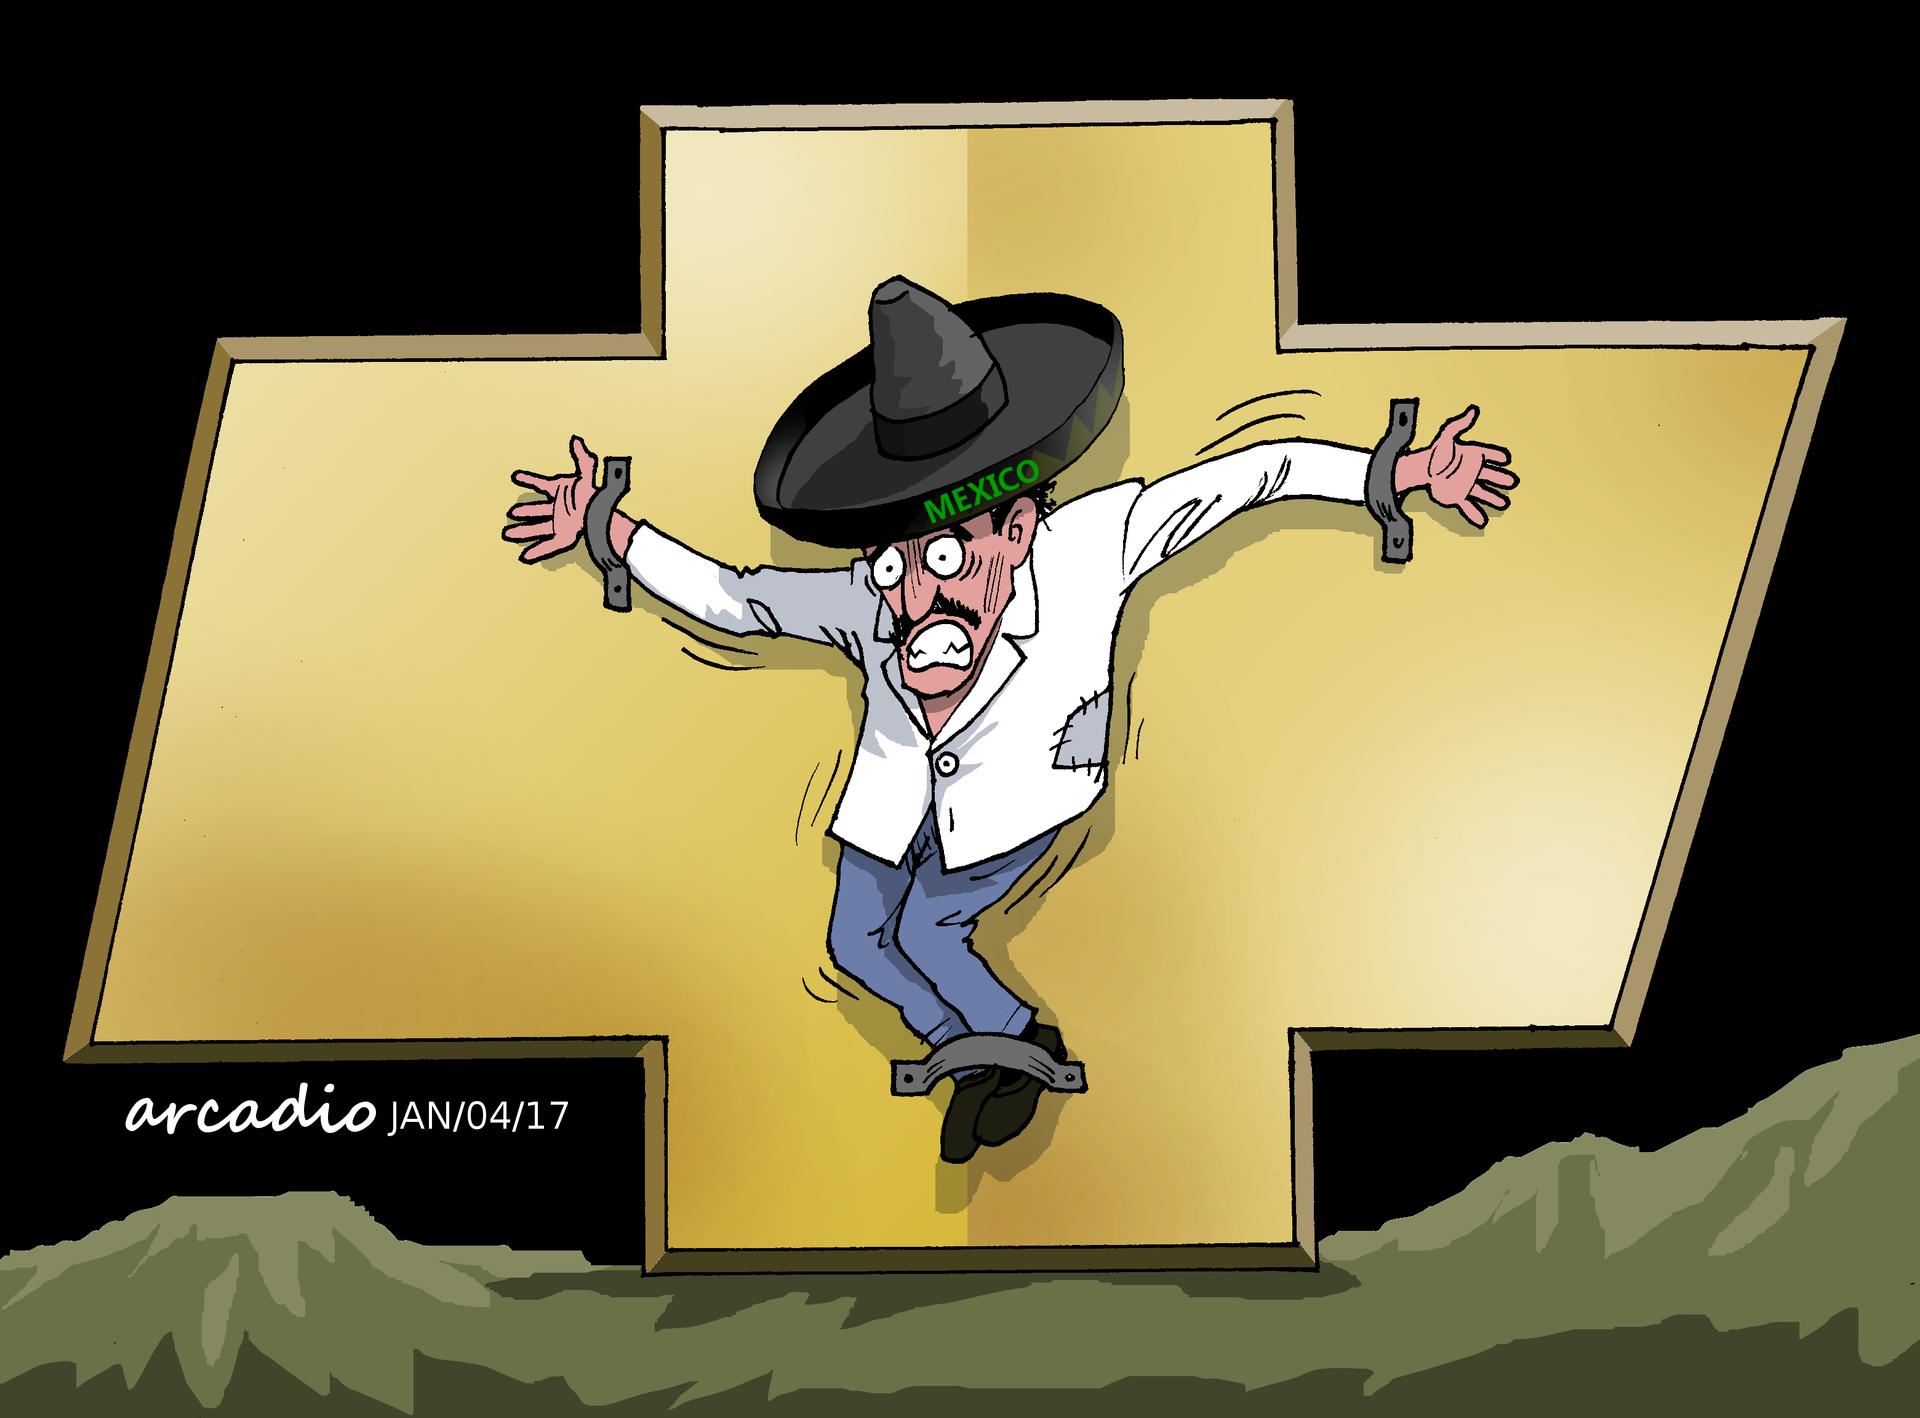 A cartoon from Costa Rica: A Mexican on the cross of Chevrolet.